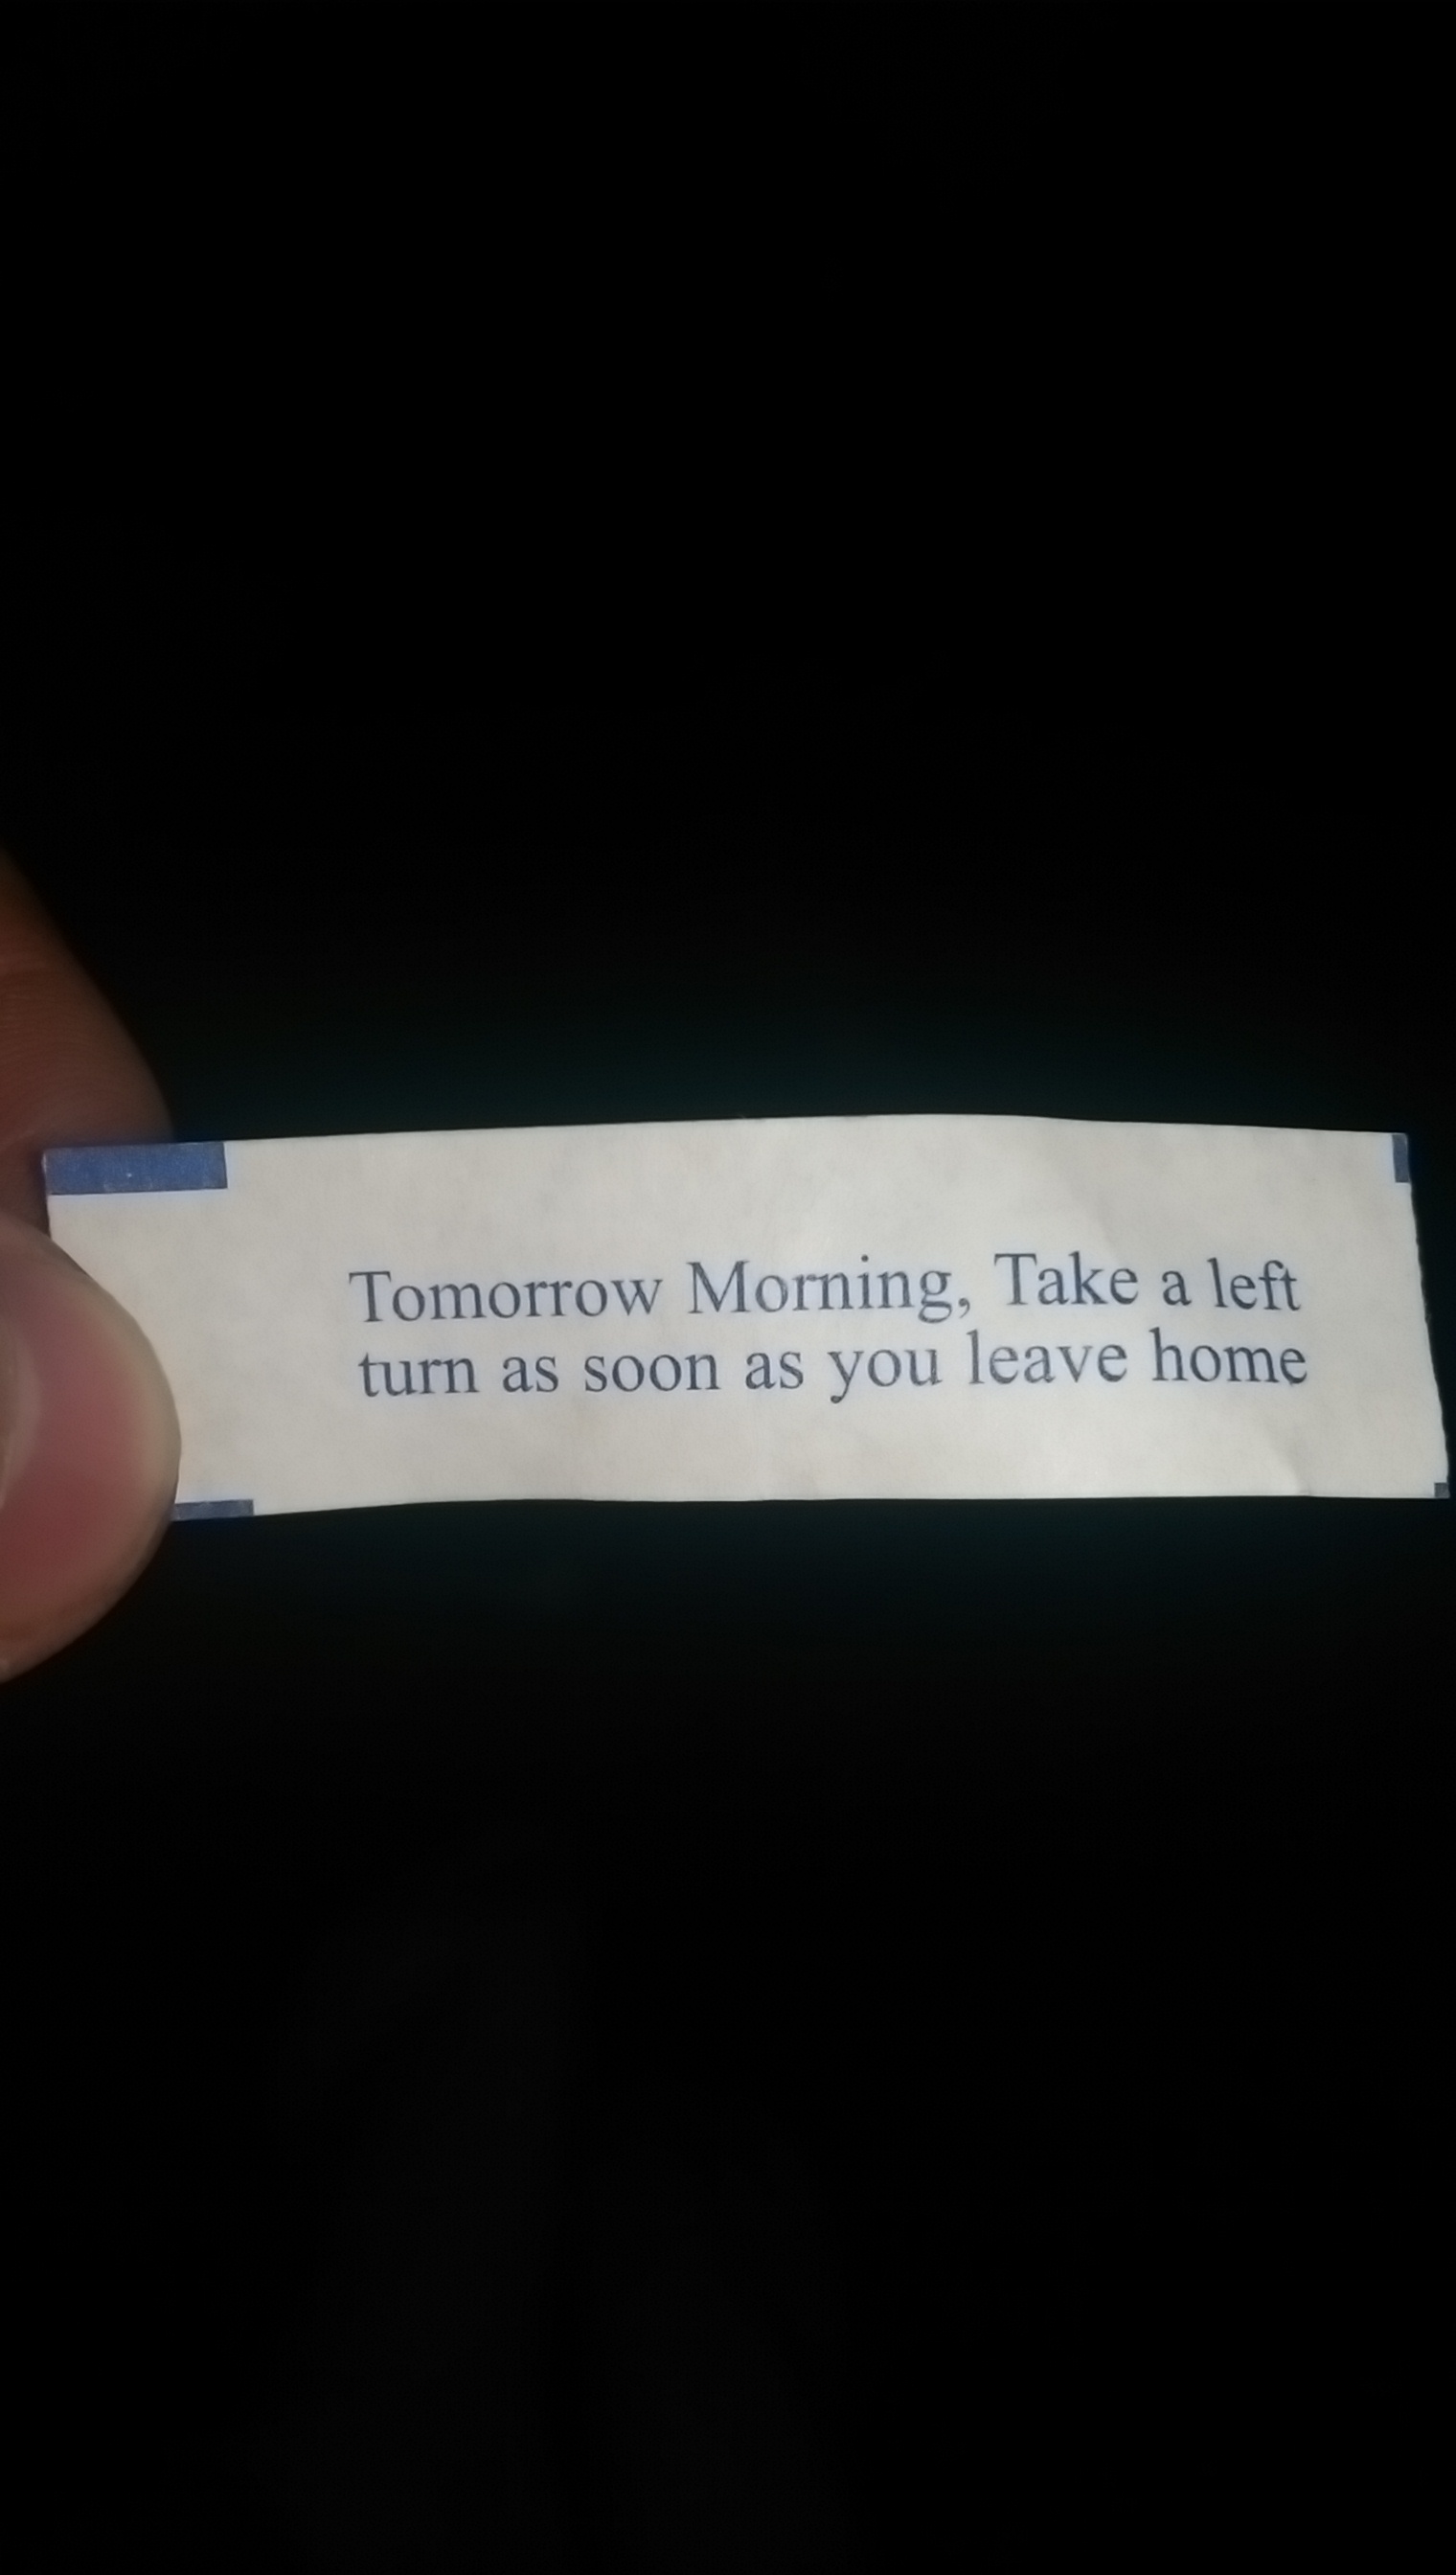 That's oddly specific fortune cookie.